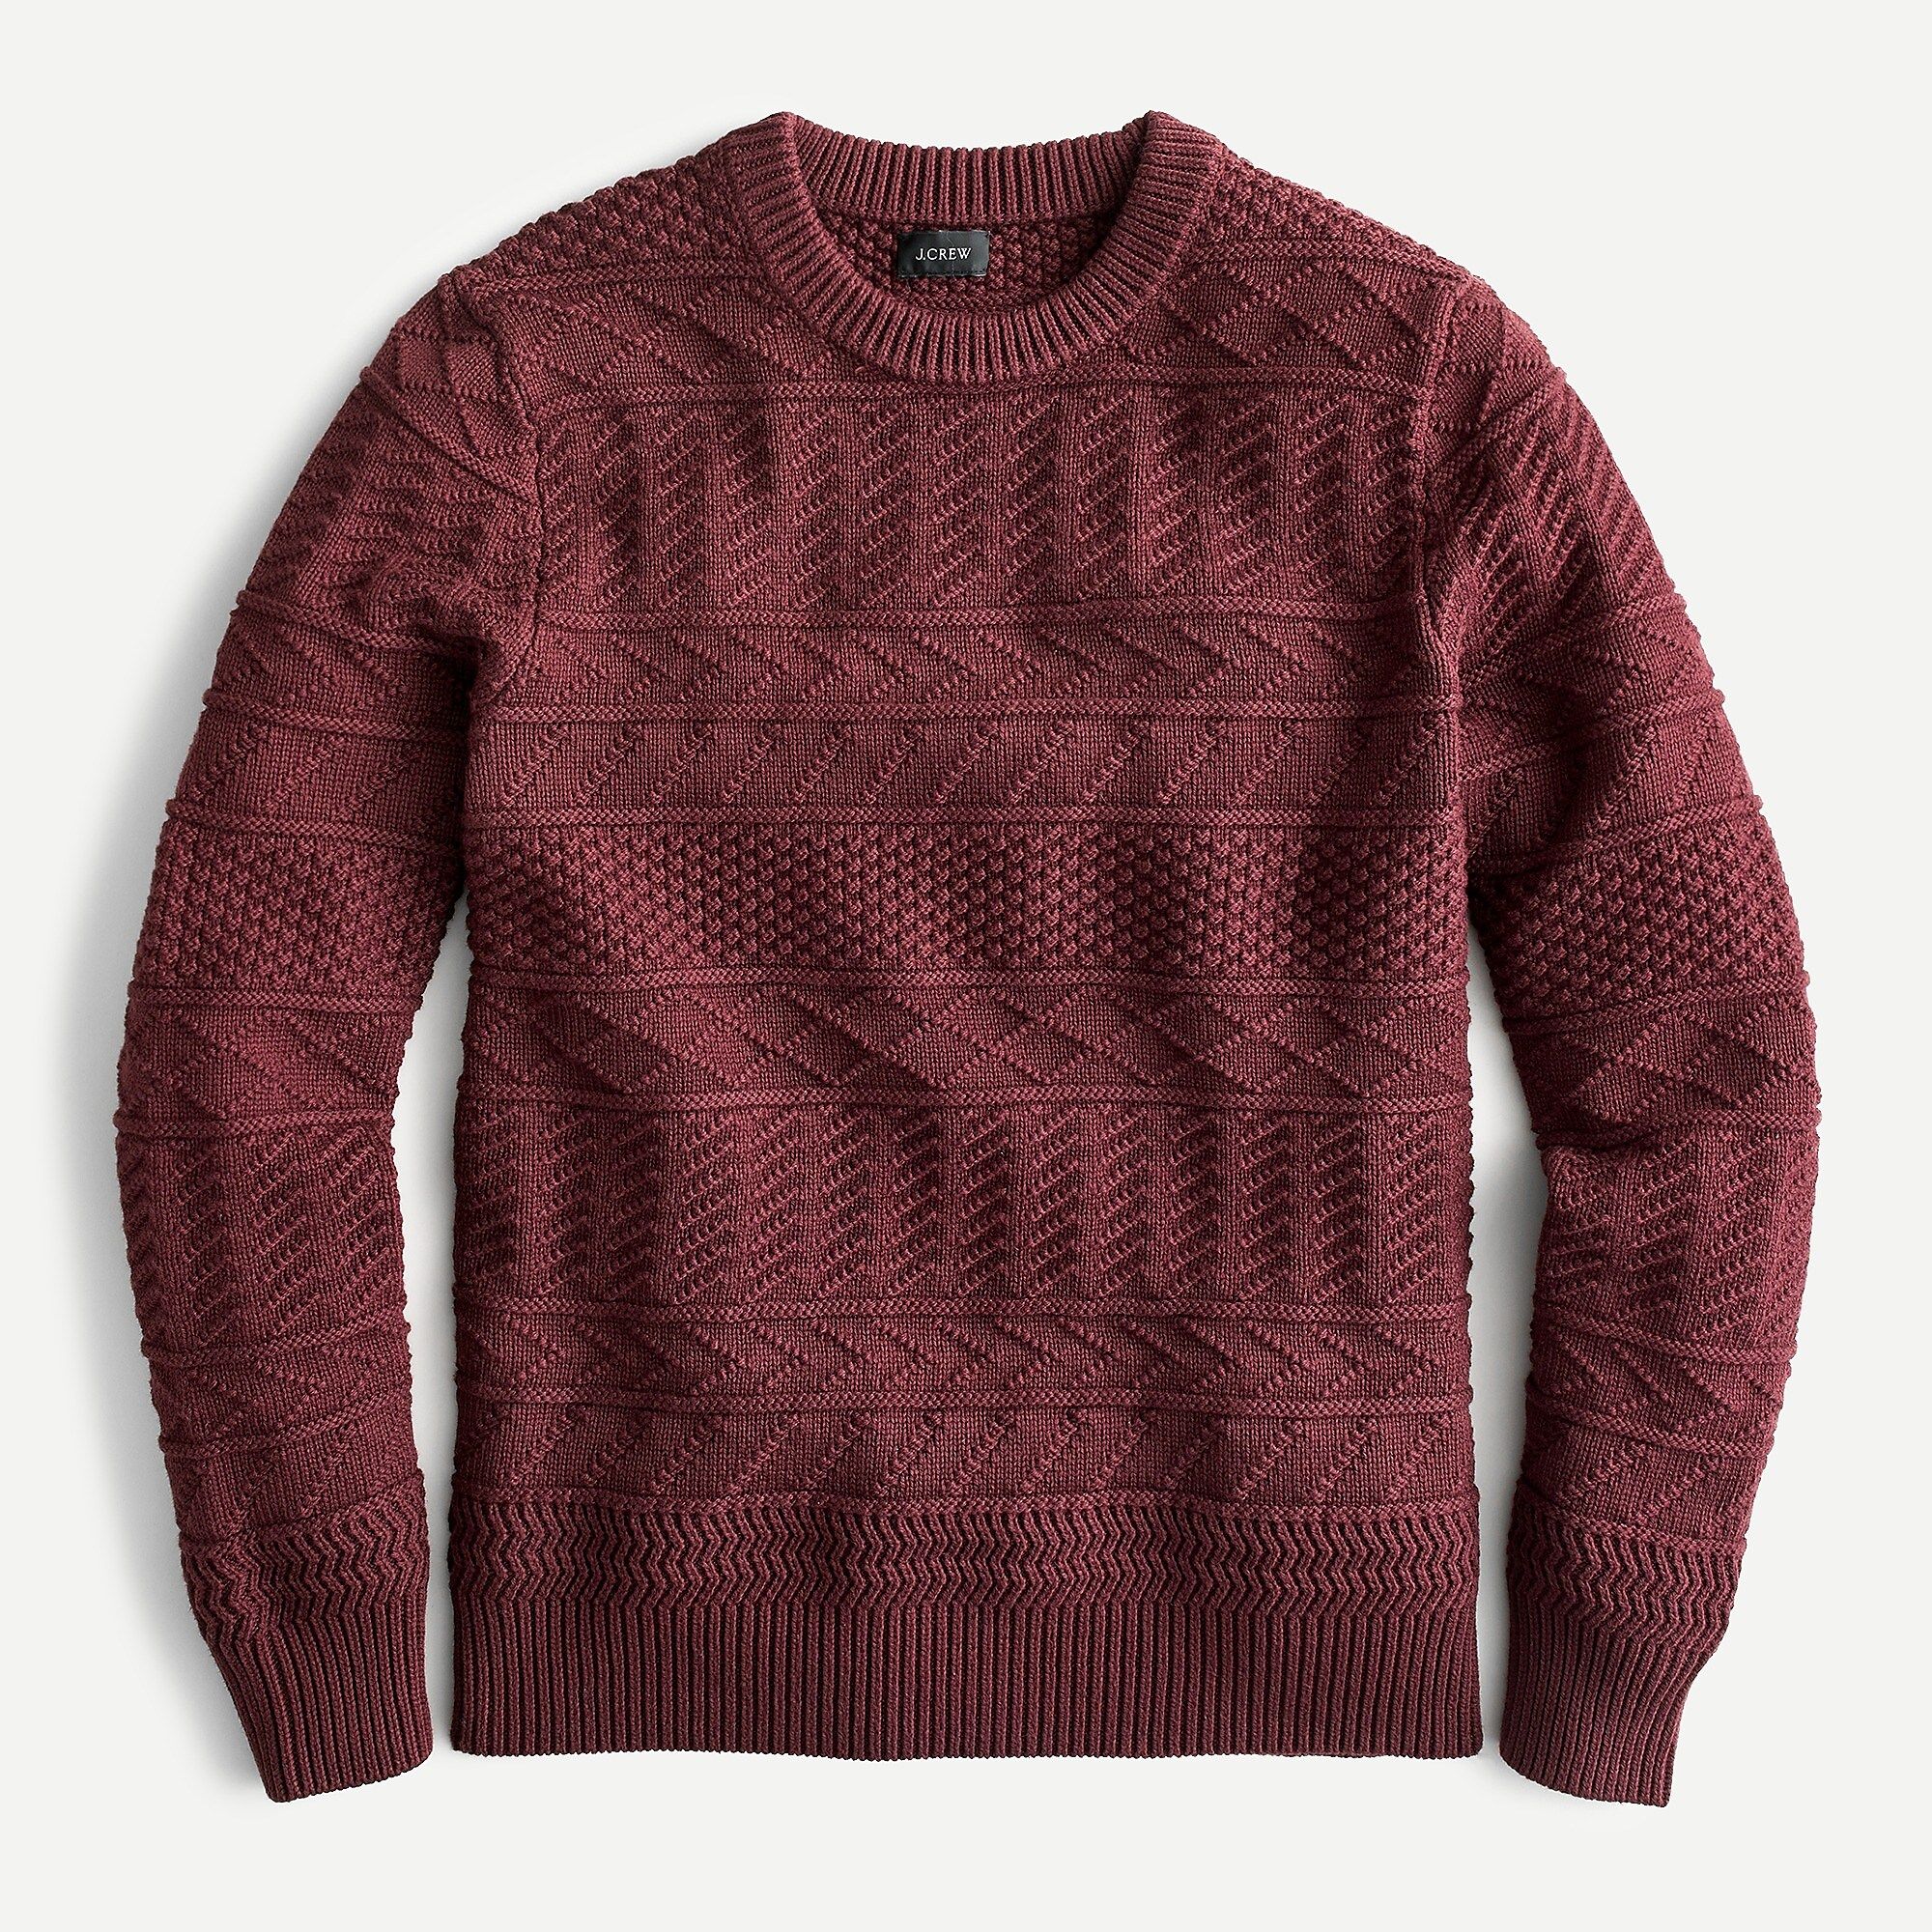 Cotton sweater in combination guernsey stitch | J.Crew US